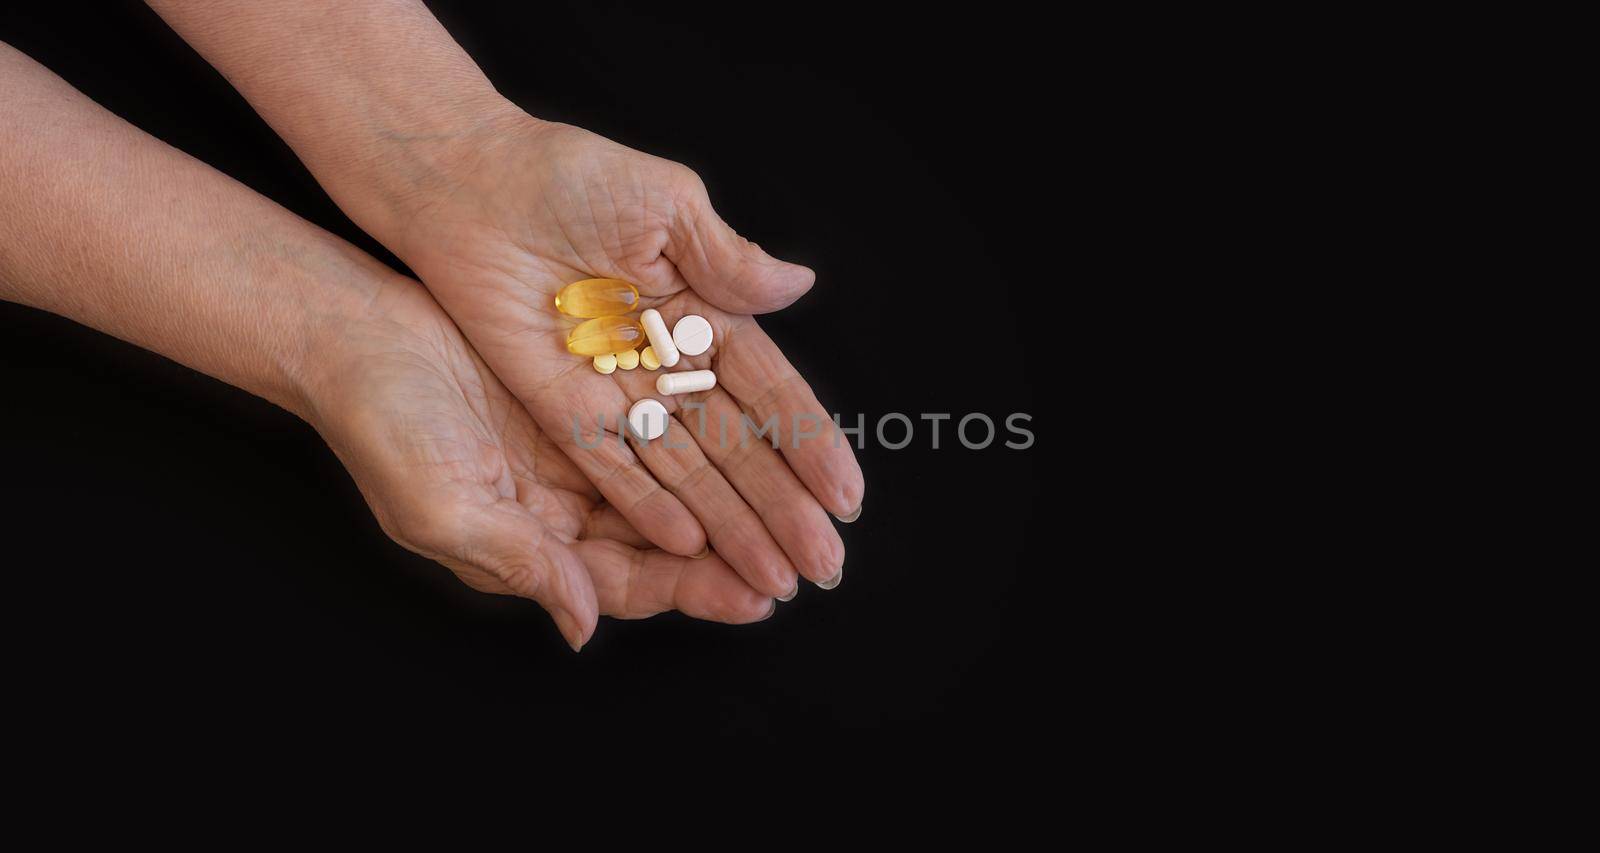 Black background, In the hands of an elderly woman different types of medicines by Ramanouskaya